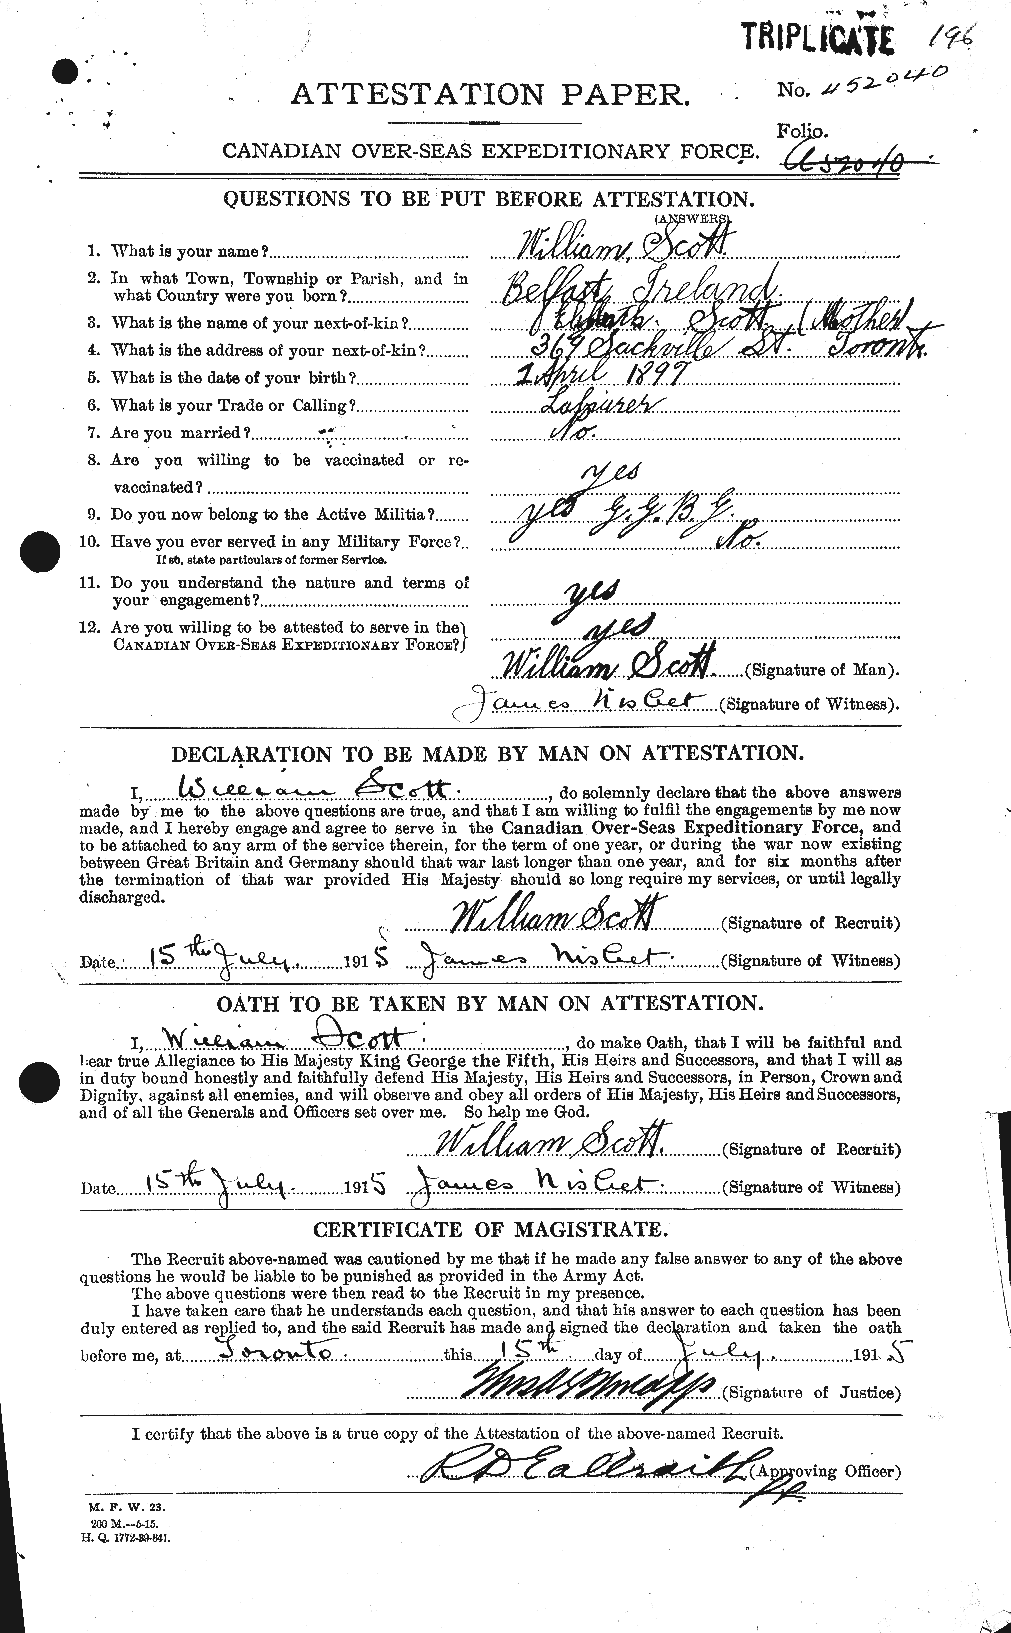 Personnel Records of the First World War - CEF 087662a